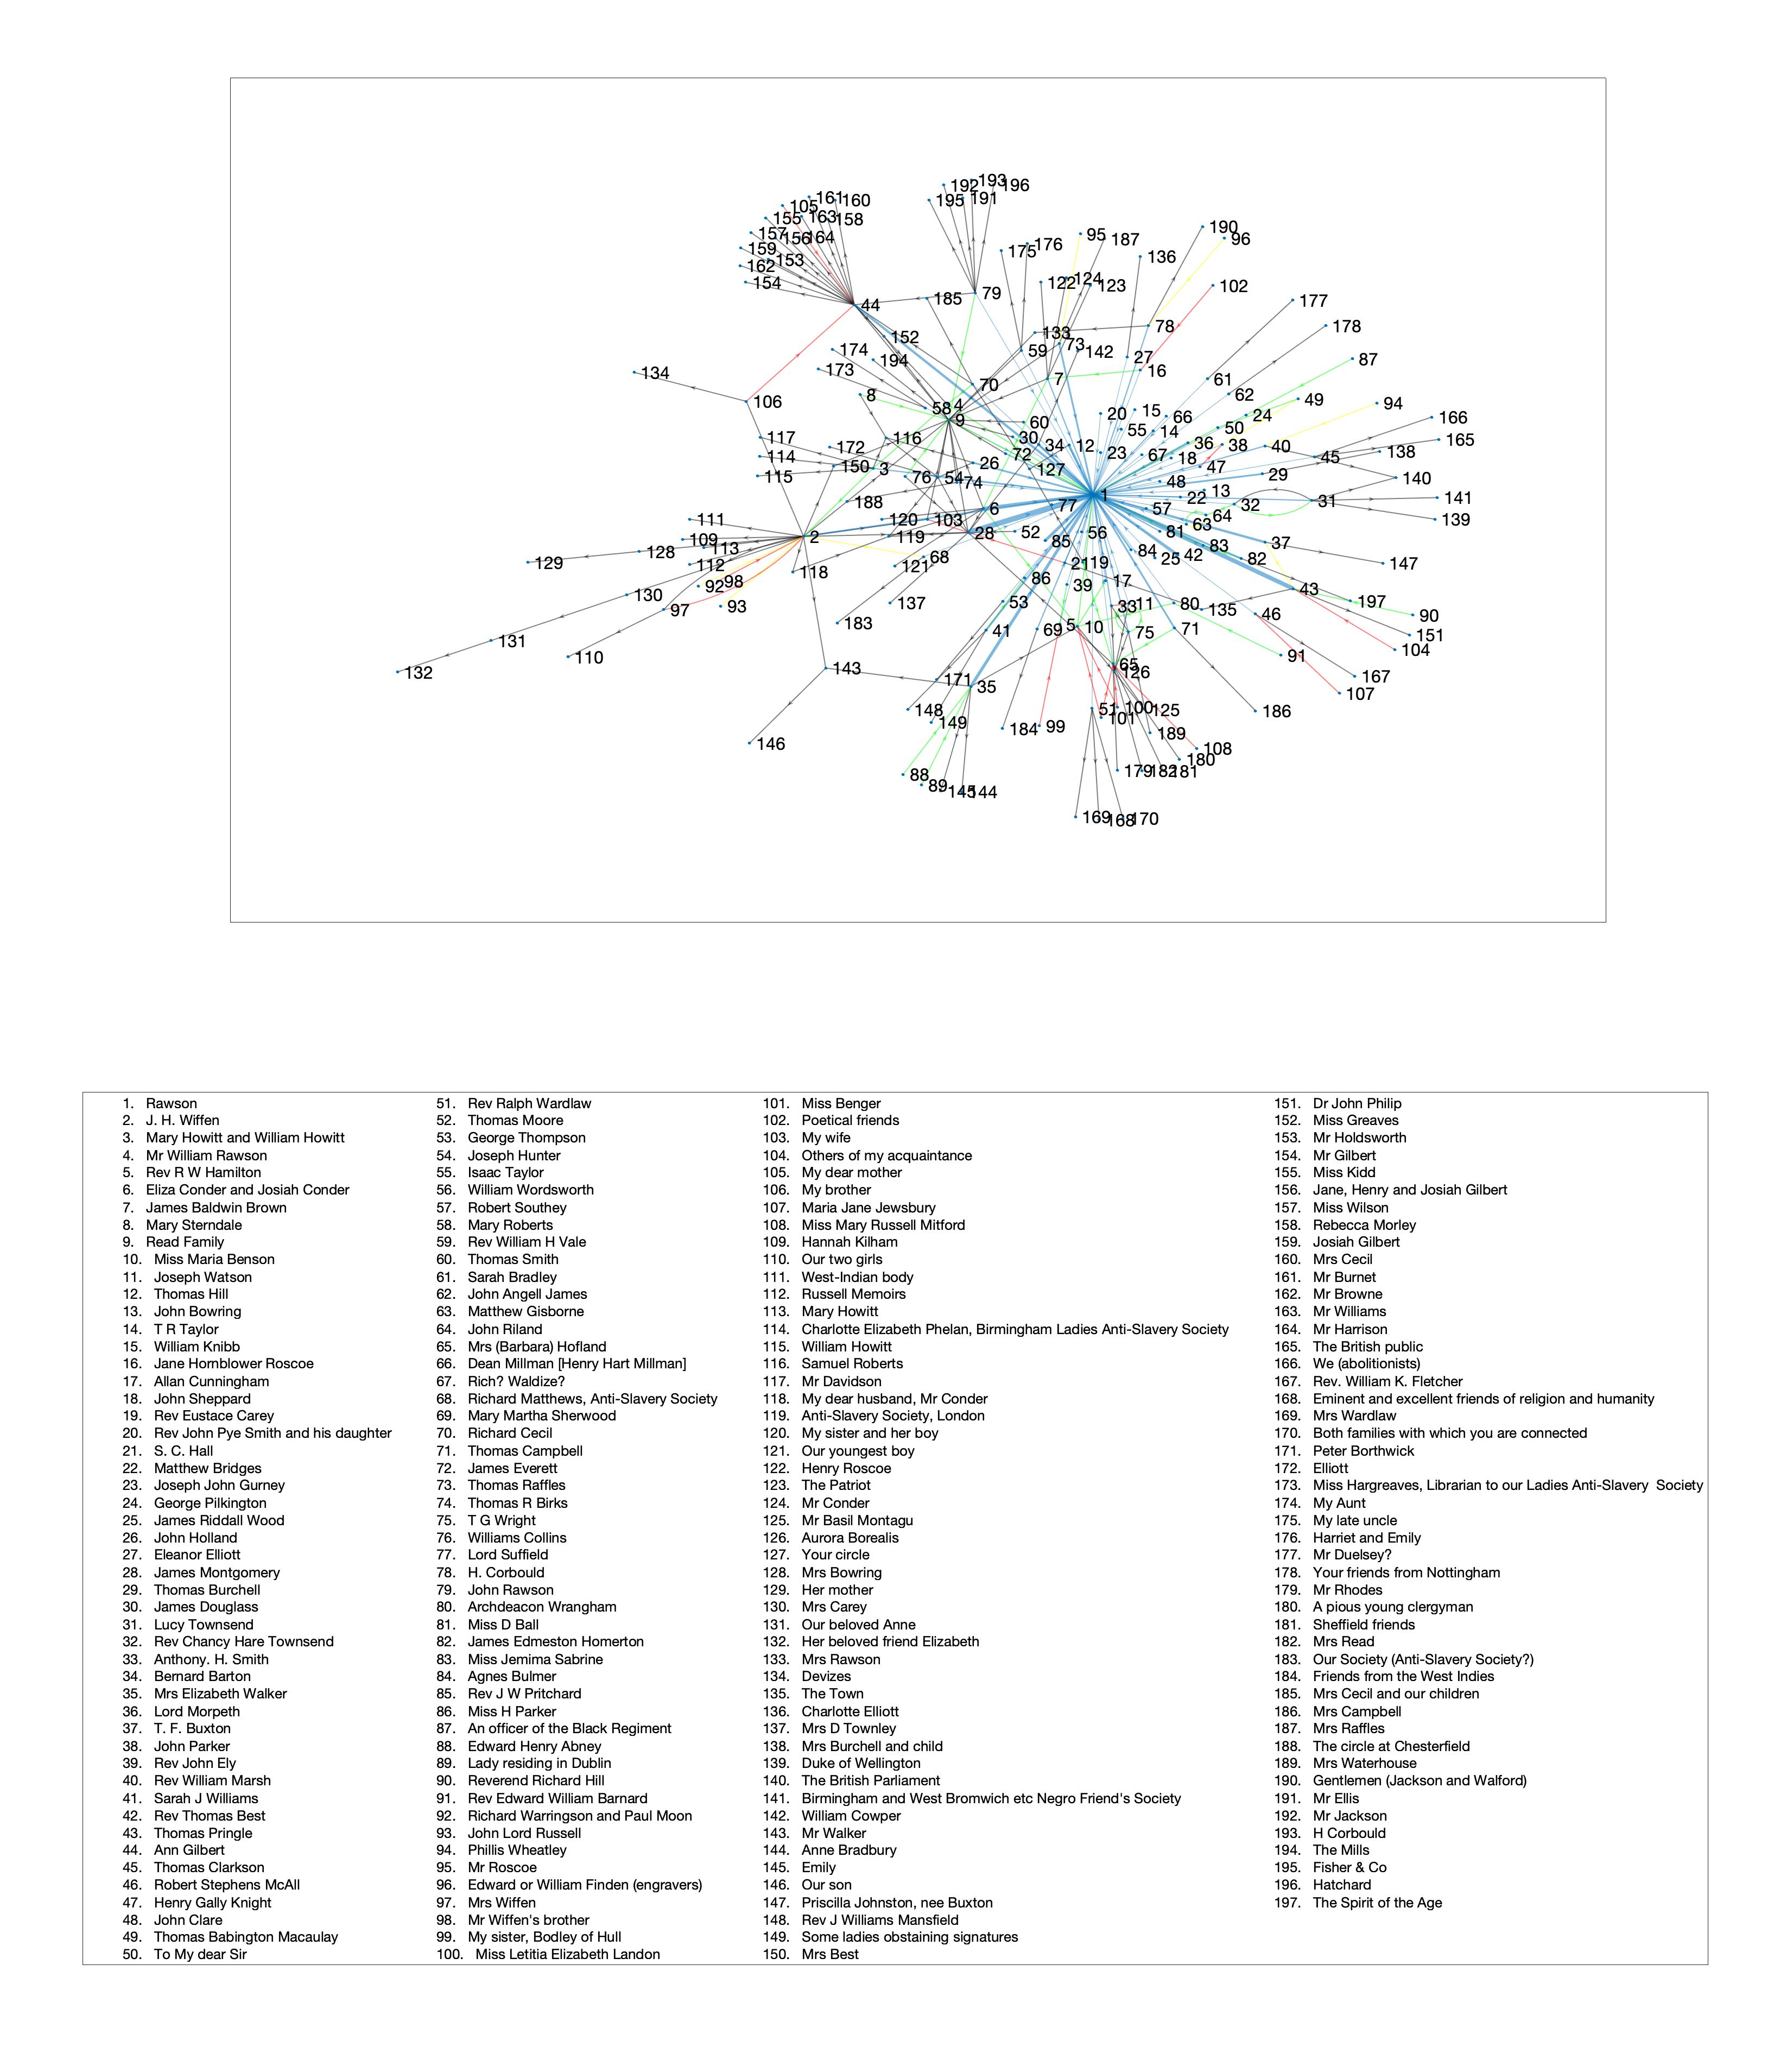 Network graph visualizing the
              relationships between Rawson and her correspondents